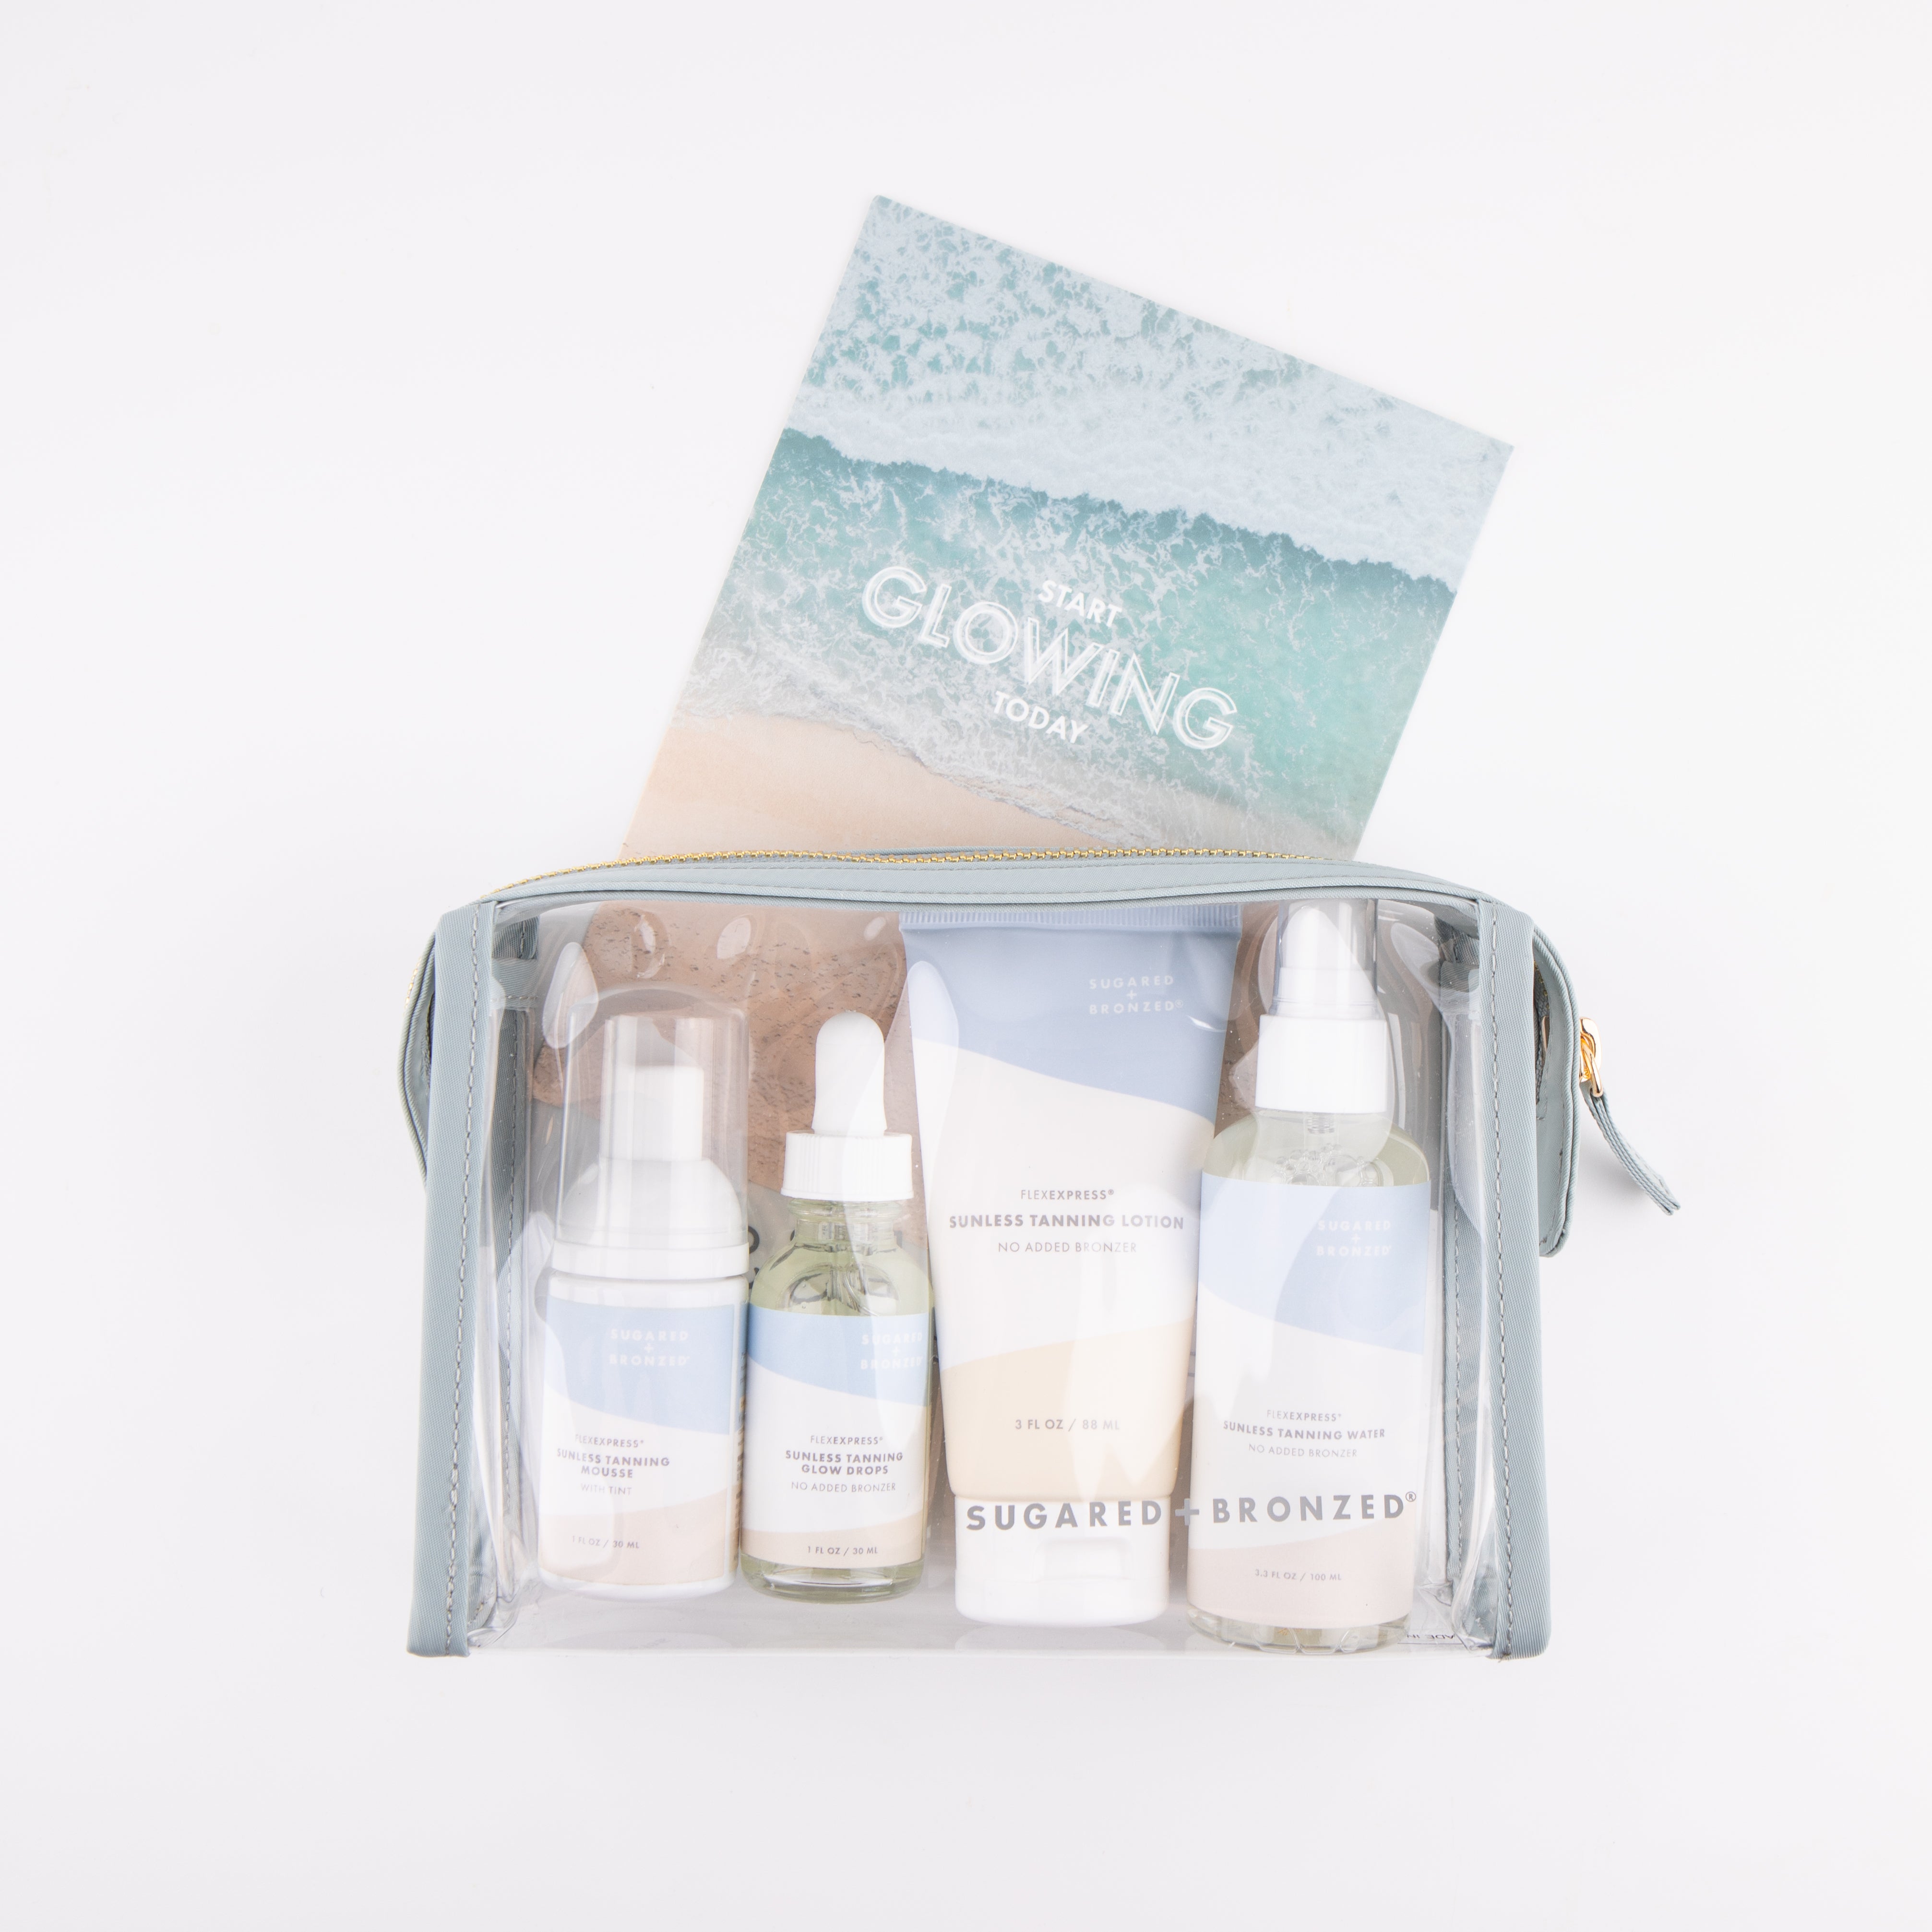 Large see-through bag containing bottles of Sugared and Bronzed tanning glow drops, tanning mousse, tanning lotion, and tanning water.